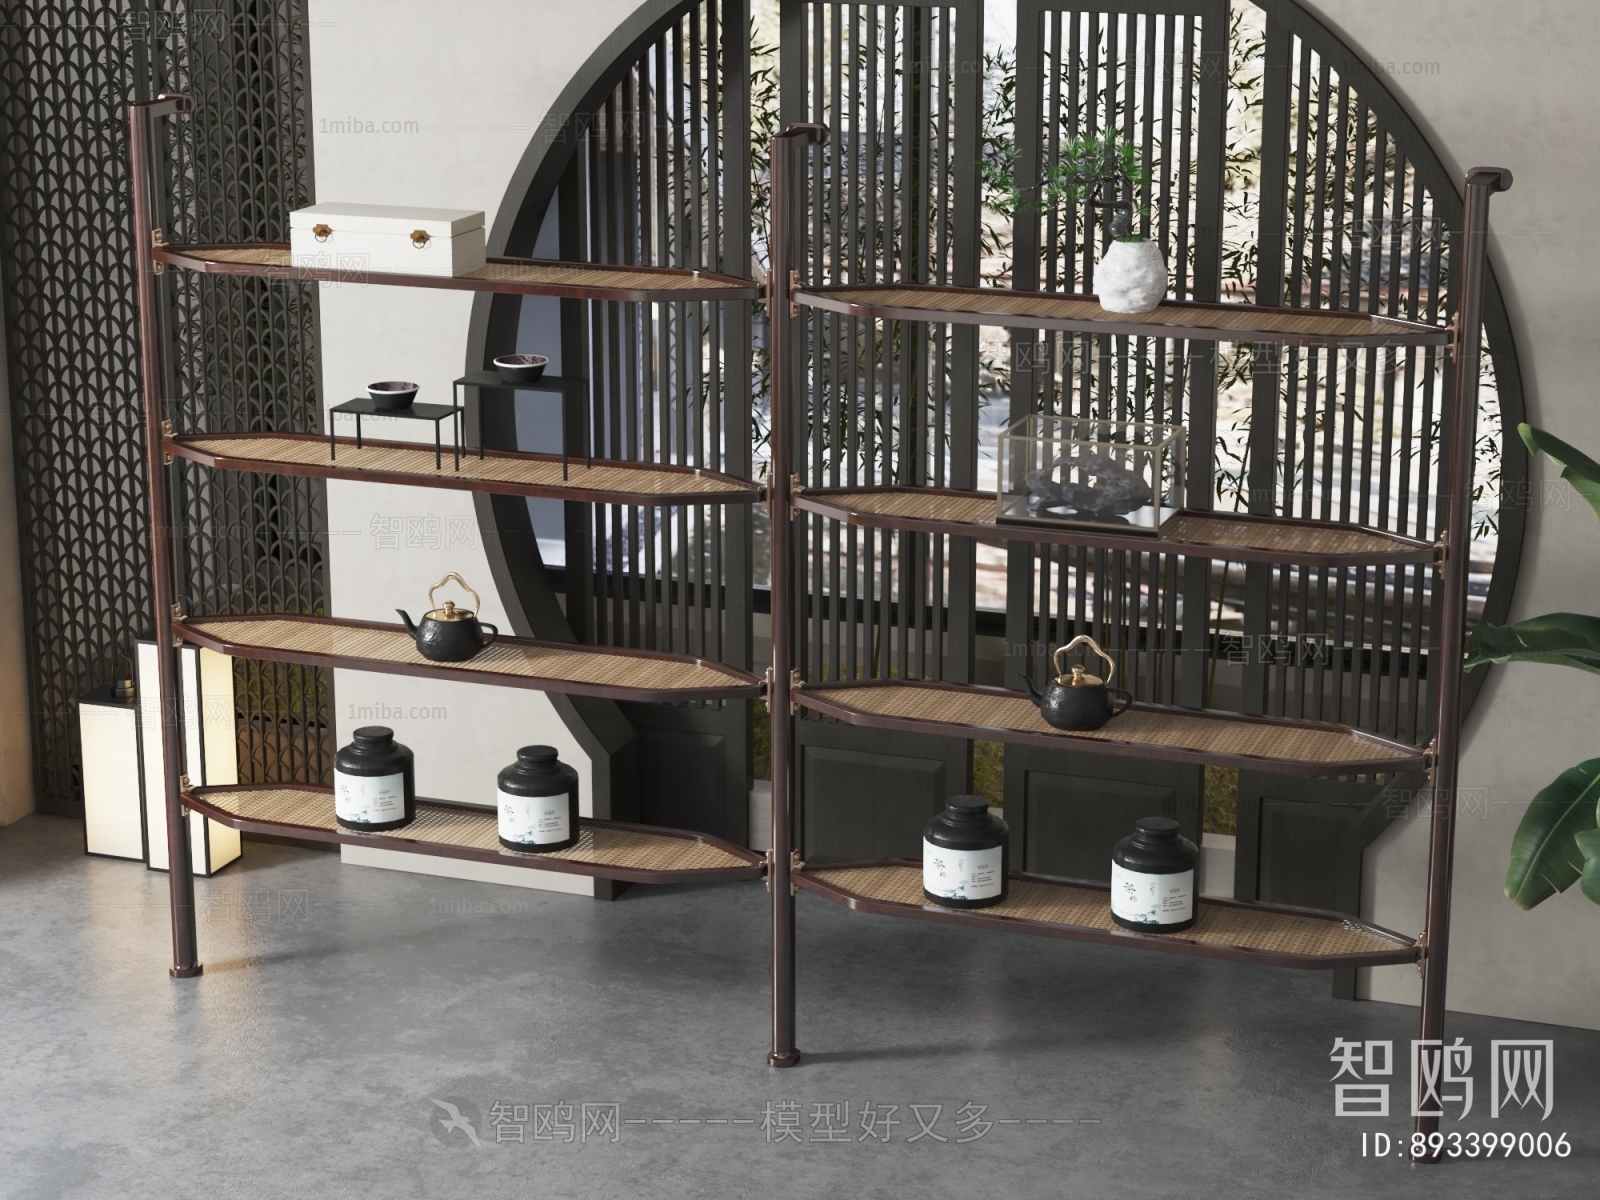 New Chinese Style Chinese Style Shelving